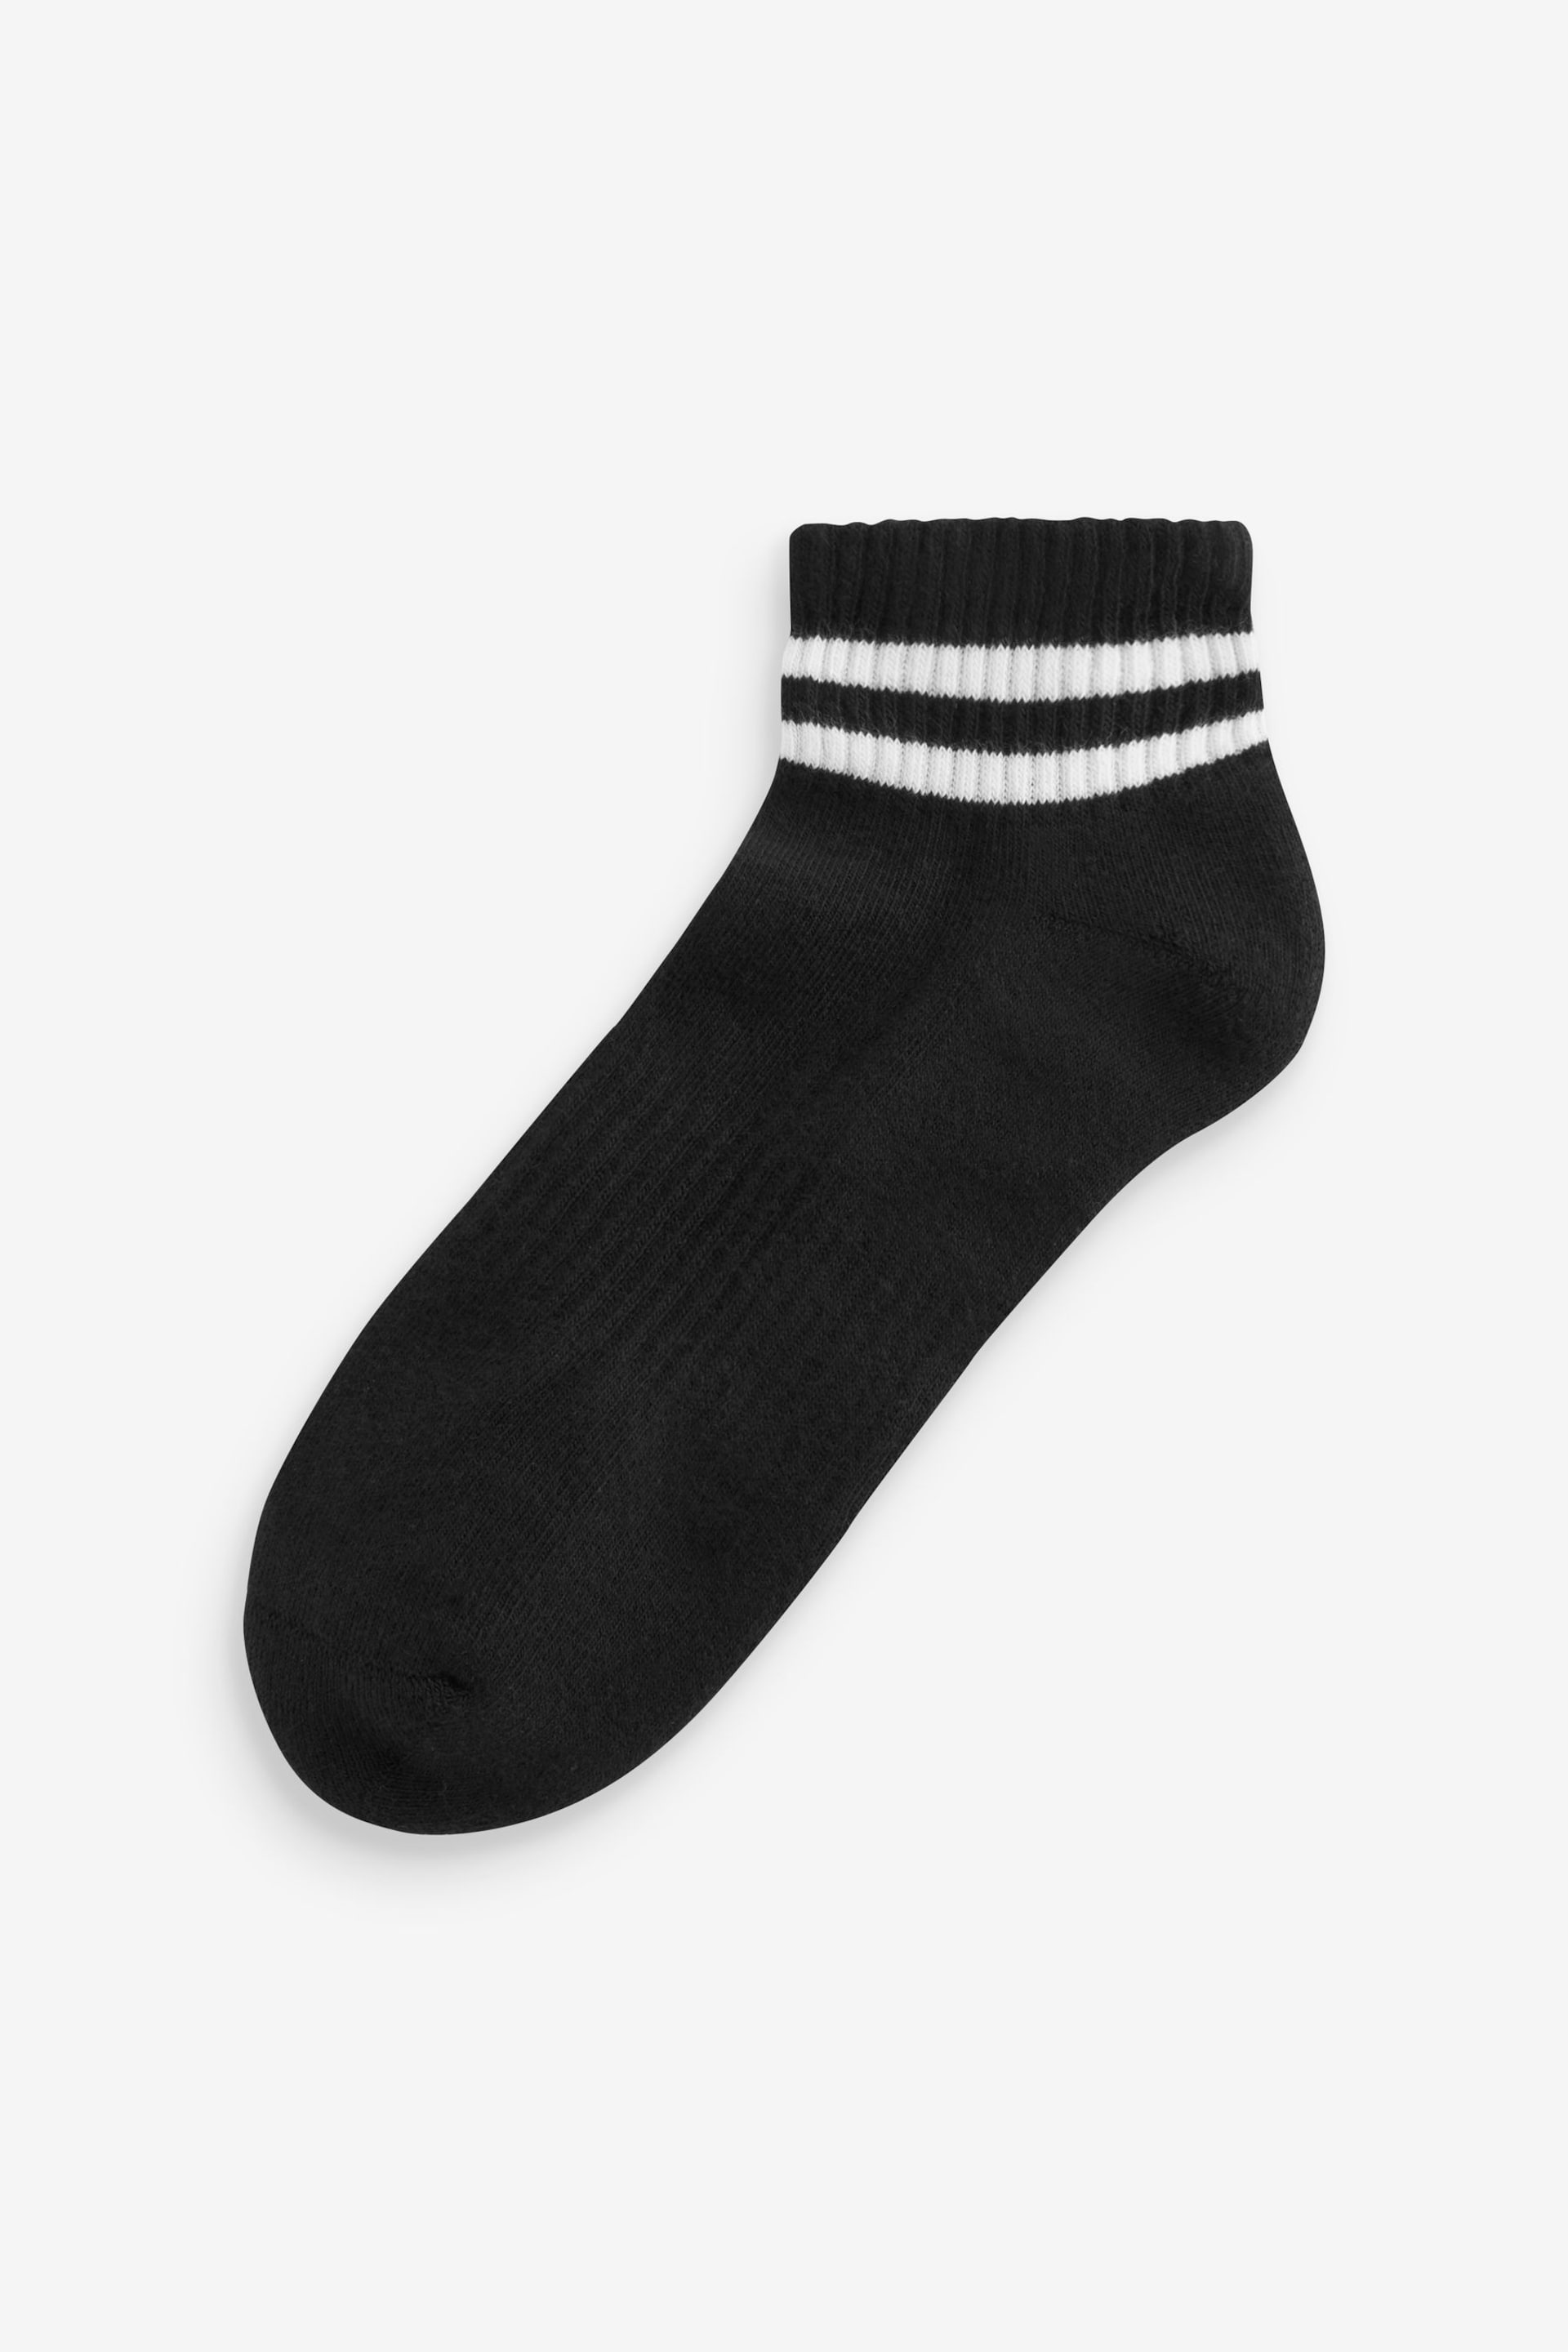 Black Stripe Cushion Sole Trainers Socks 3 Pack With Arch Support - Image 2 of 3